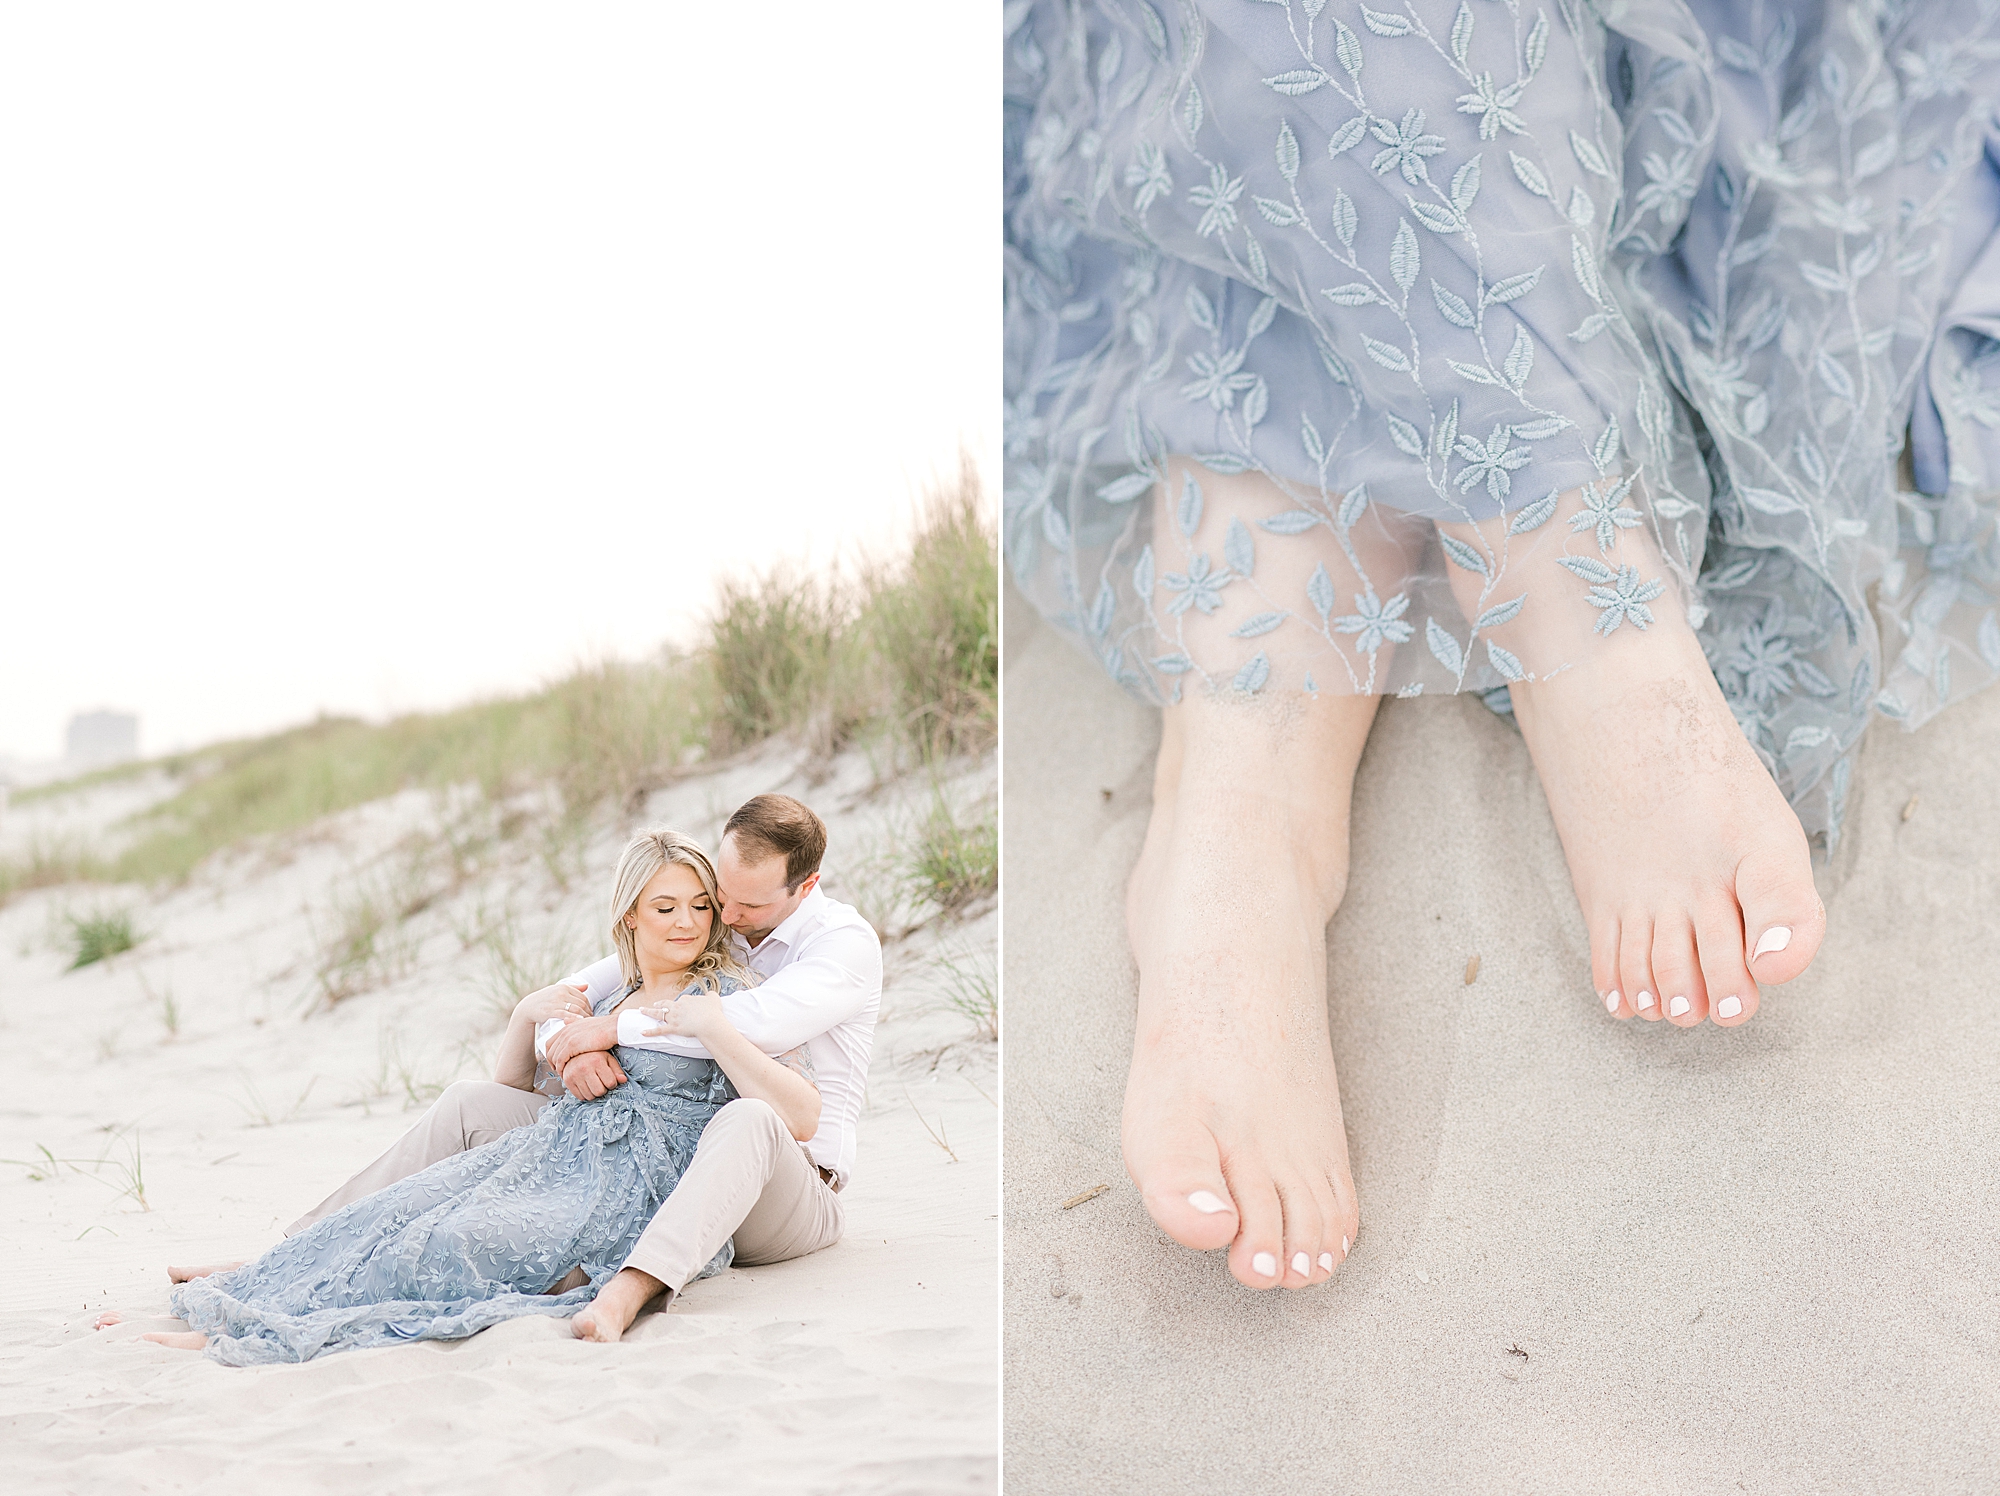 man sits hugging woman in blue lace dress from behind on beach in New Jersey